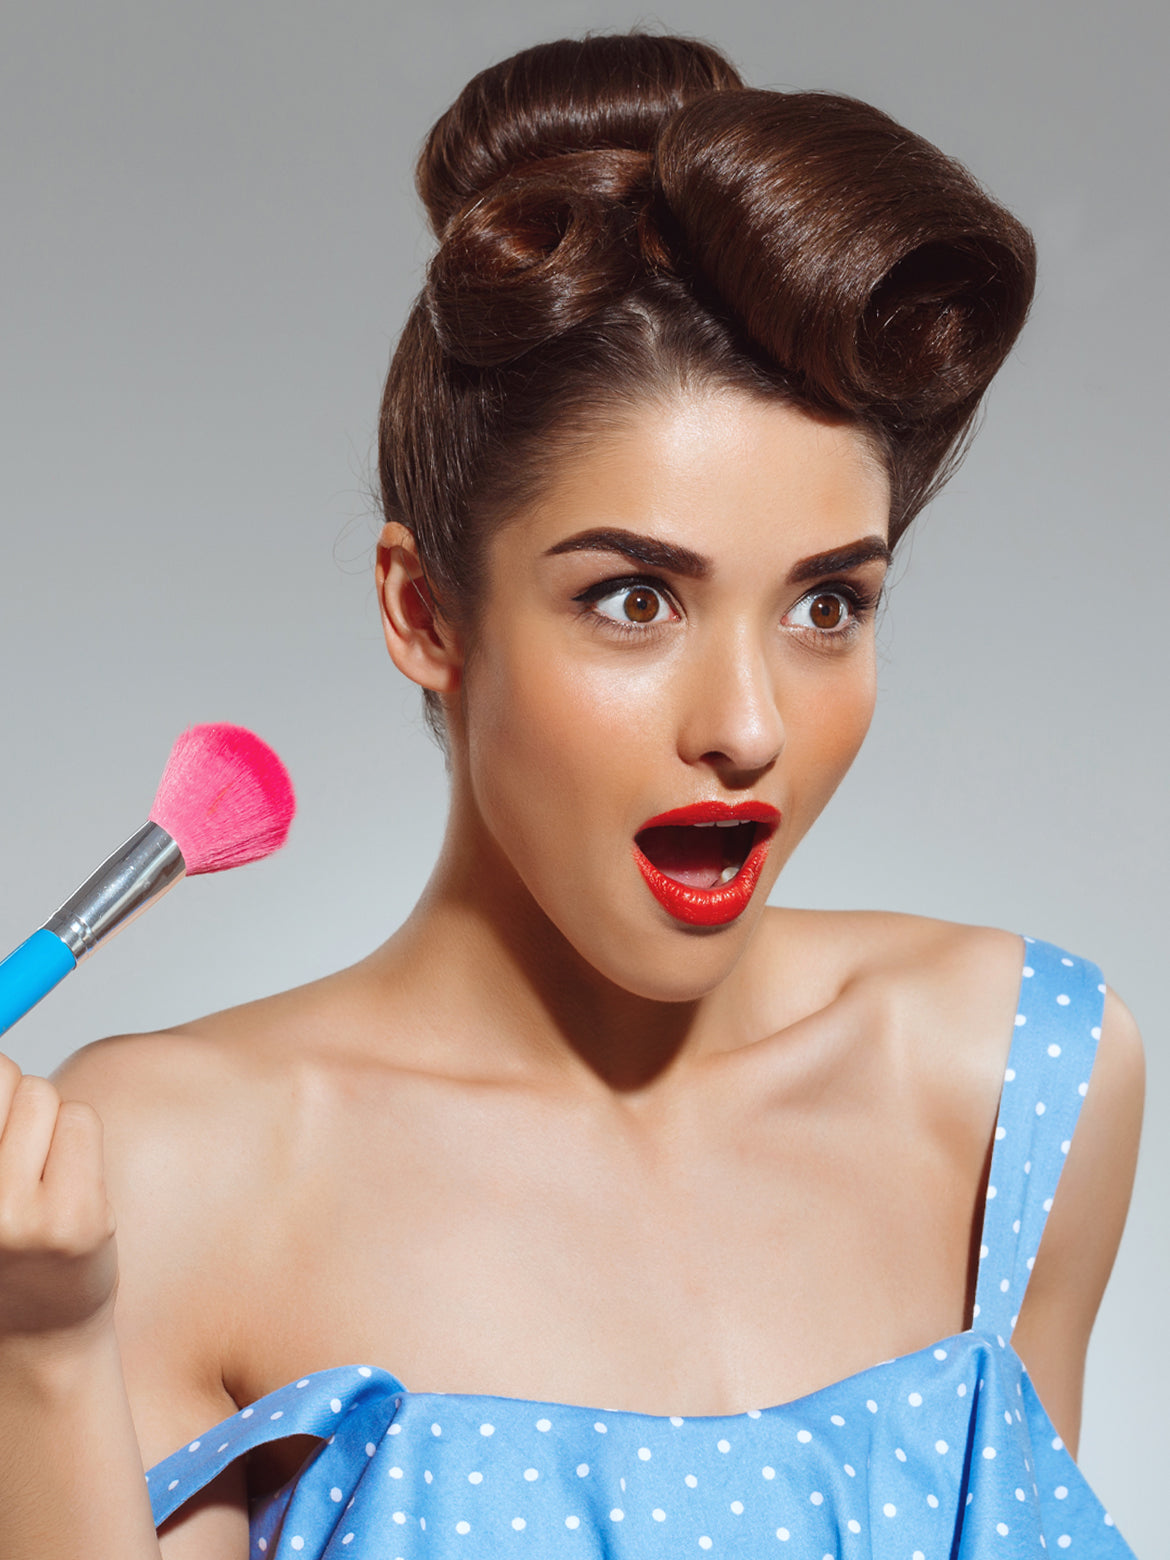 Common beauty makeup mistakes and how to avoid them